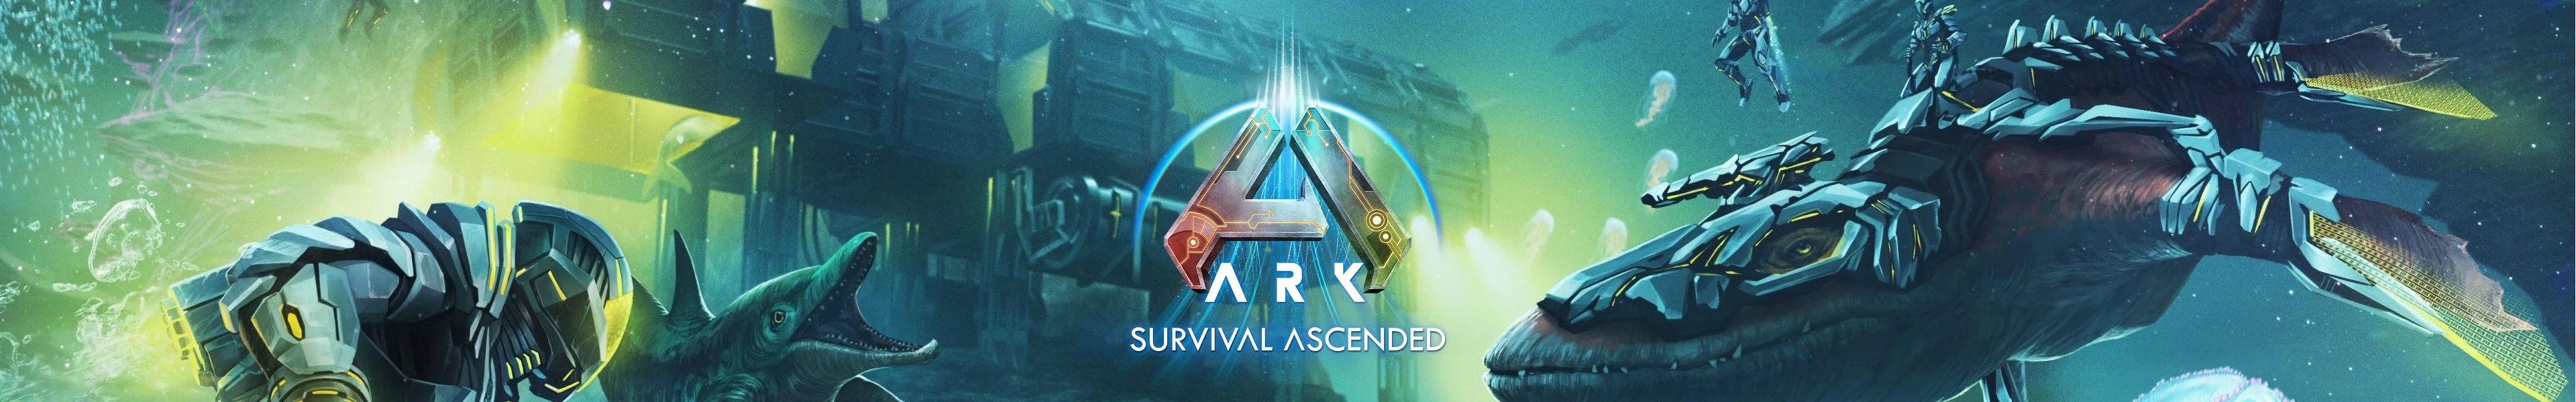 ARK: Survival Ascended How to Tame Dinosaurs Banner